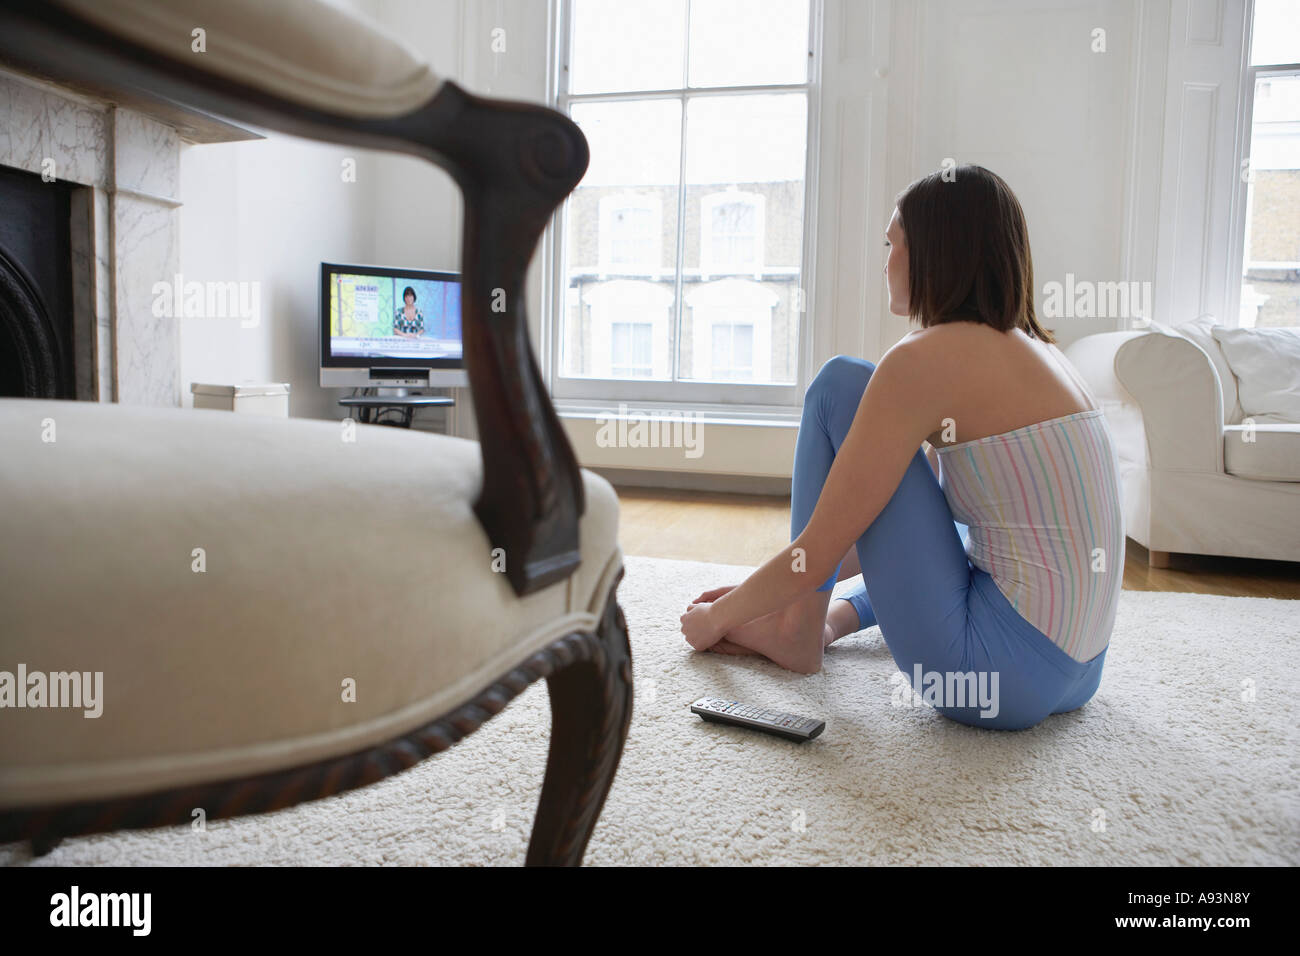 Woman sitting on floor, watching television, back view Stock Photo